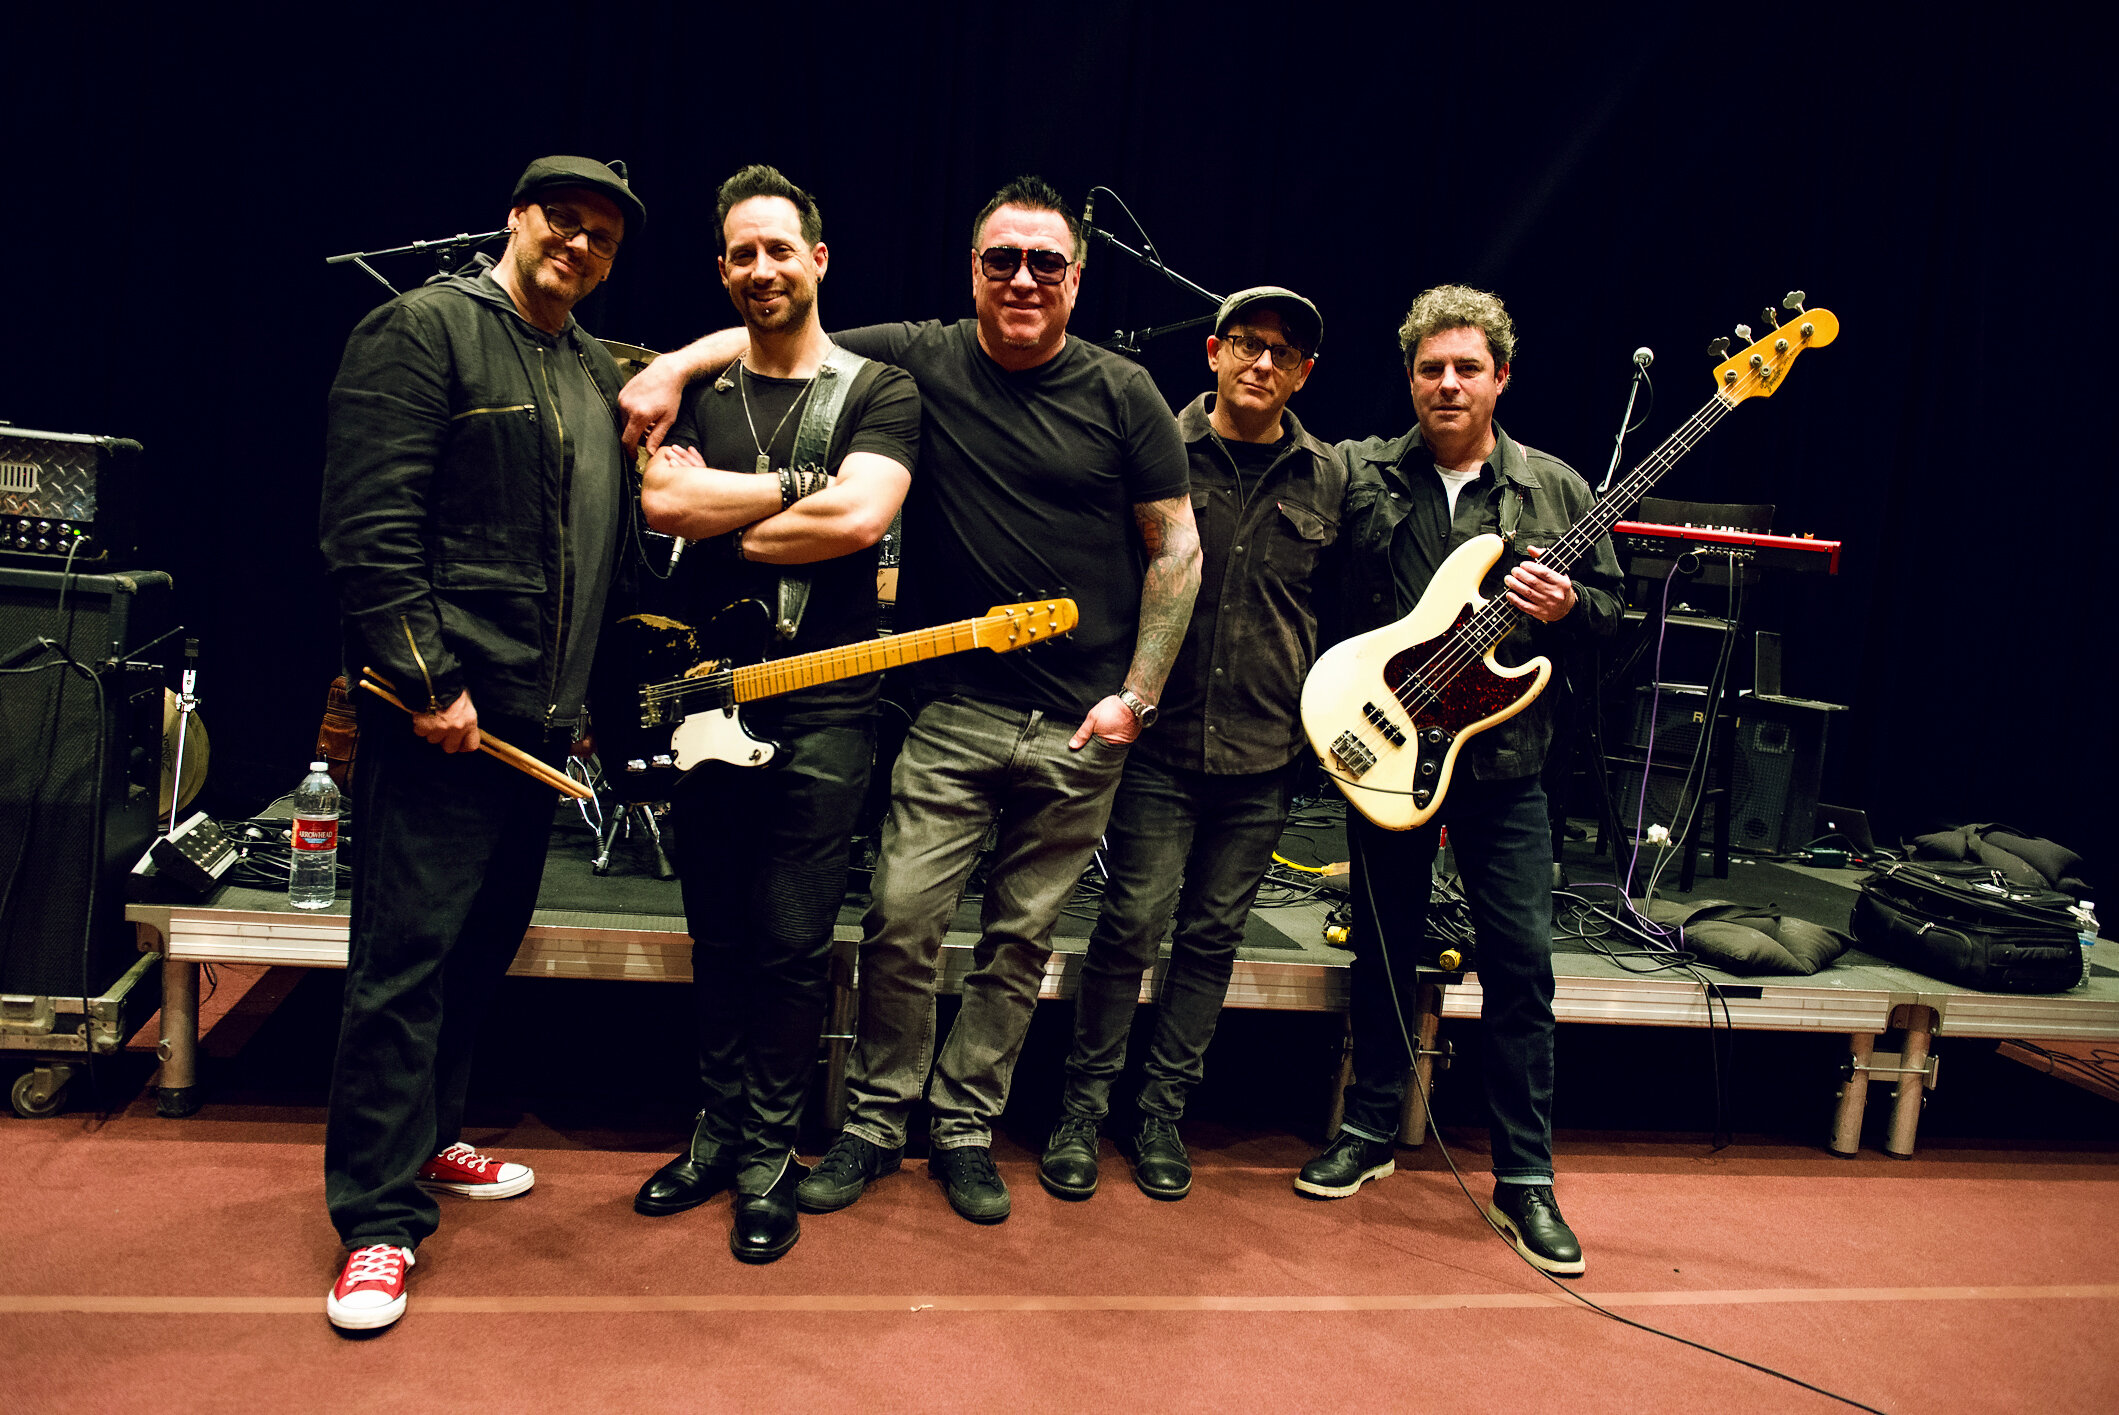 Hey now, Smash Mouth is playing a show in Rochester this weekend